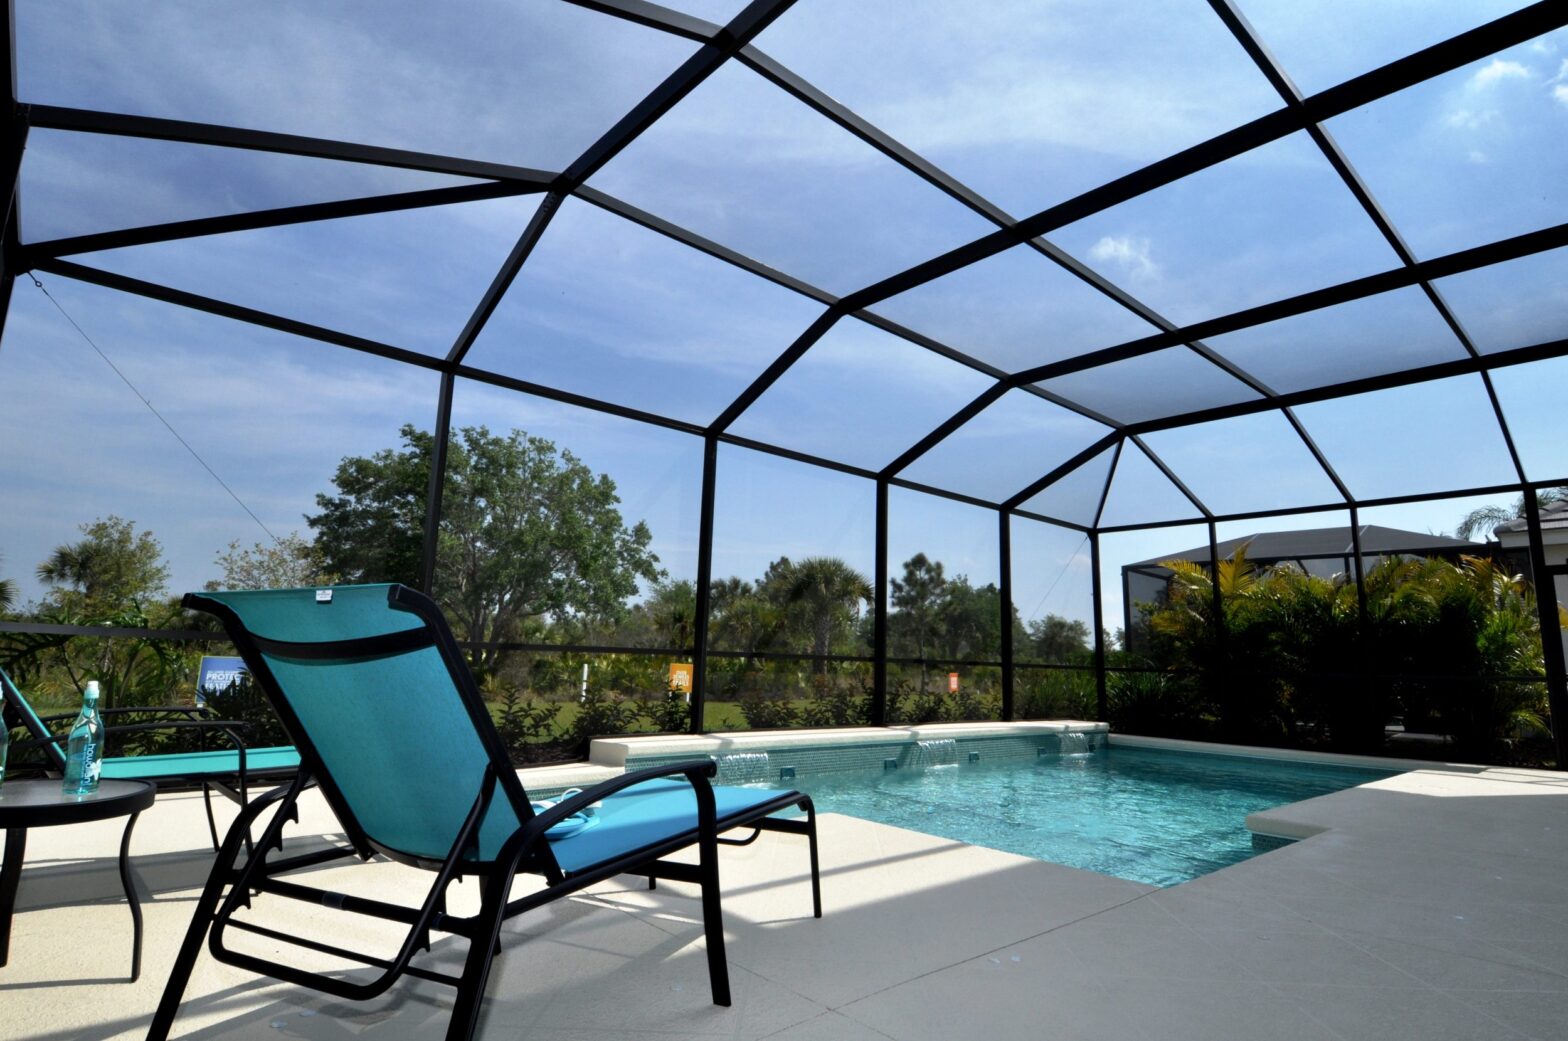 Featured image for post: How much is a screen enclosure for a pool